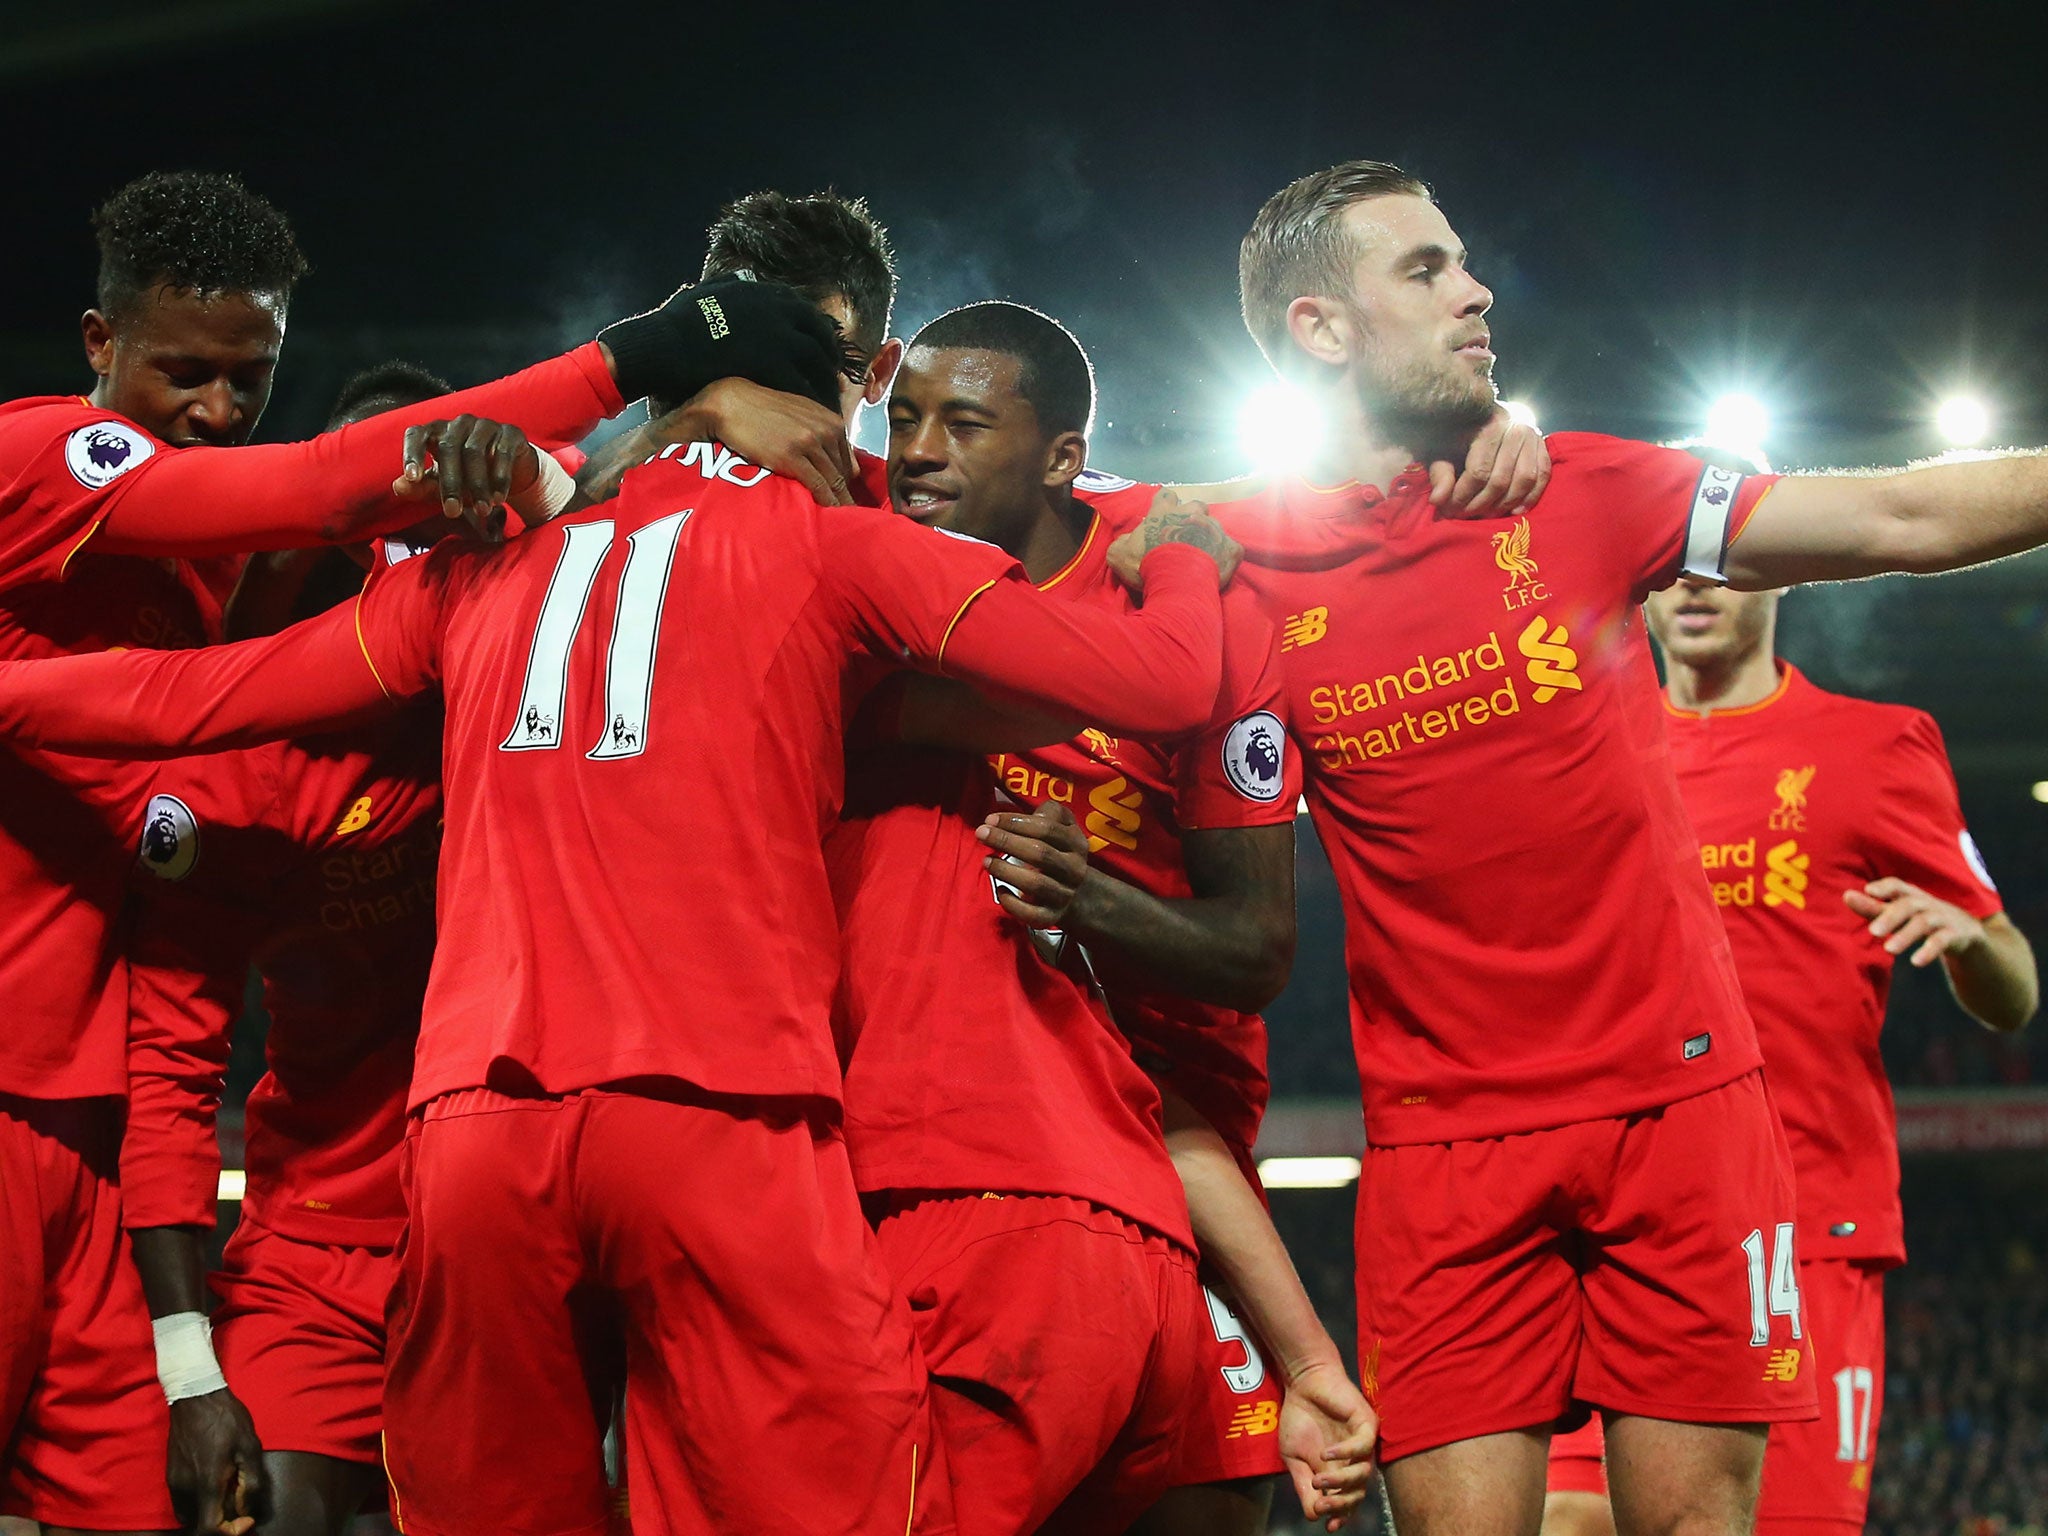 Liverpool move back into second place following victory at Anfield